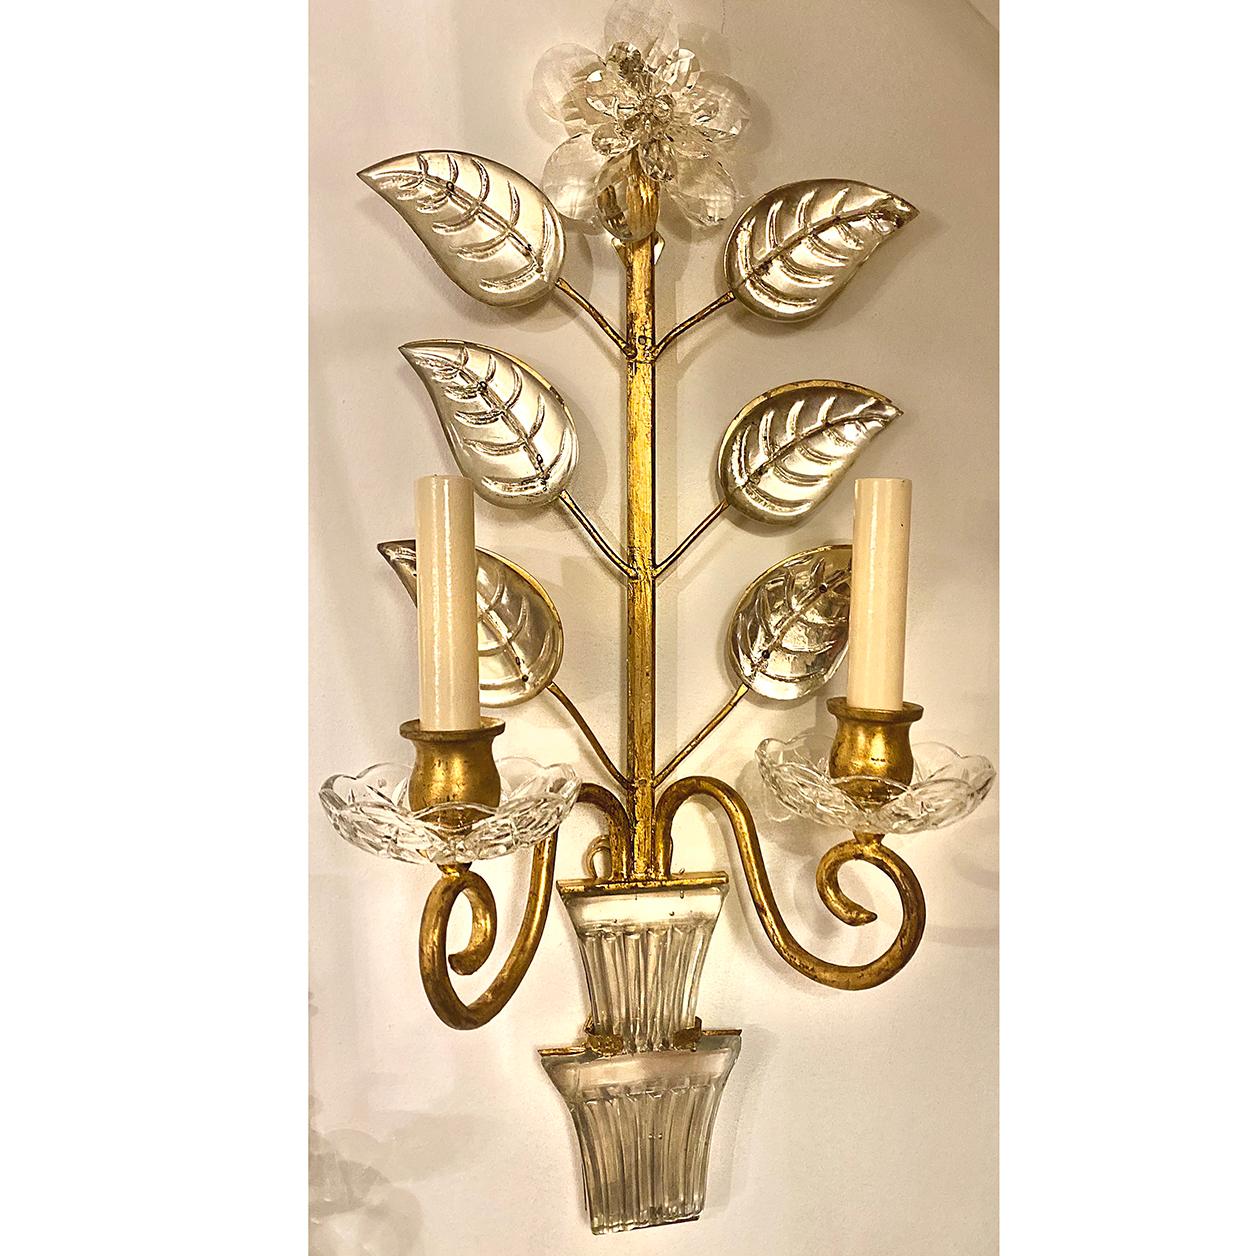 Pair of French circa 1960's two-arm gold-leafed sconces with molded and mirrored glass leaves and crystal flowers.

Measurements:
Height: 22.25